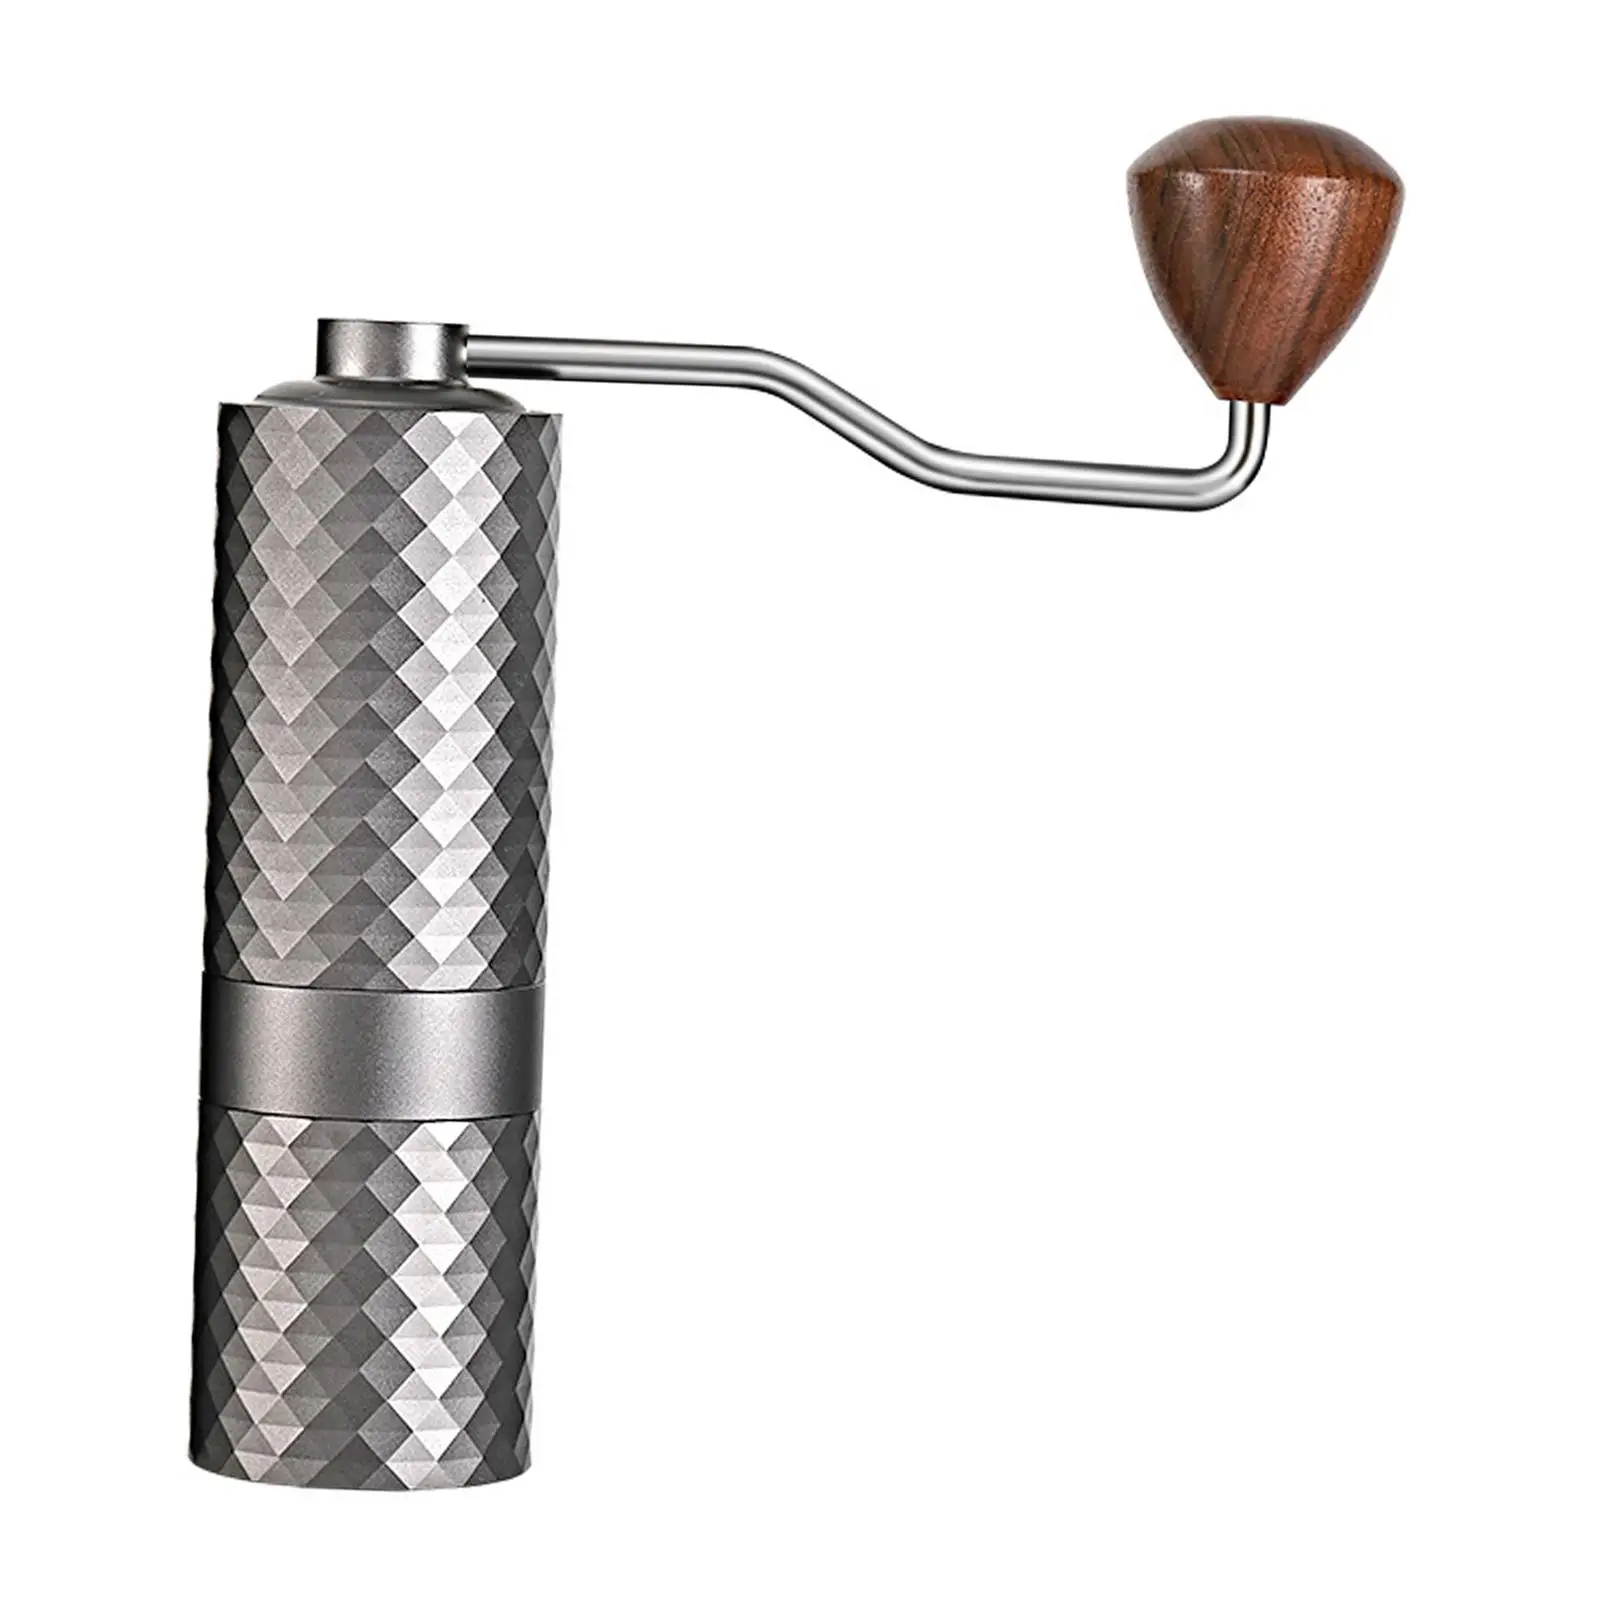 Professional Manual Grinder Conical Burr Mill Handheld Coffee Beans Mill Manual Coffee Grinder for Picnic Office Holiday Gifts